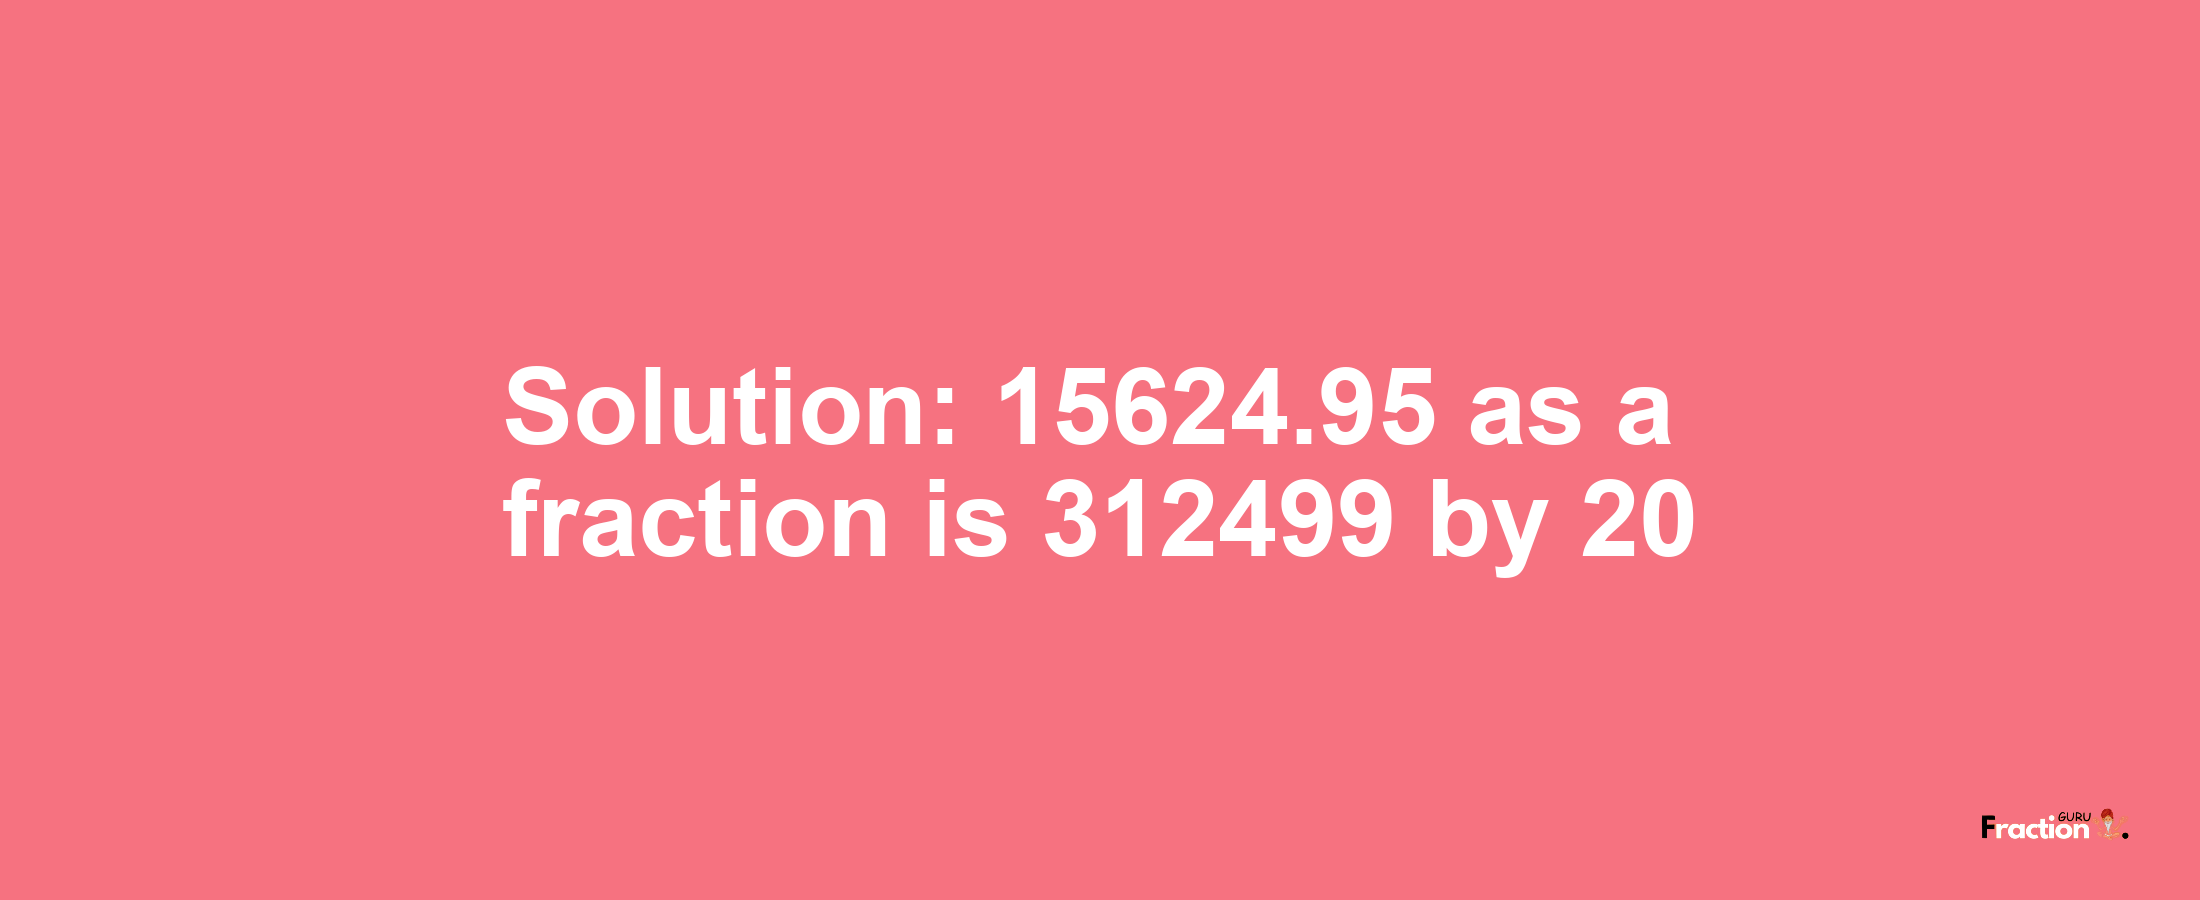 Solution:15624.95 as a fraction is 312499/20